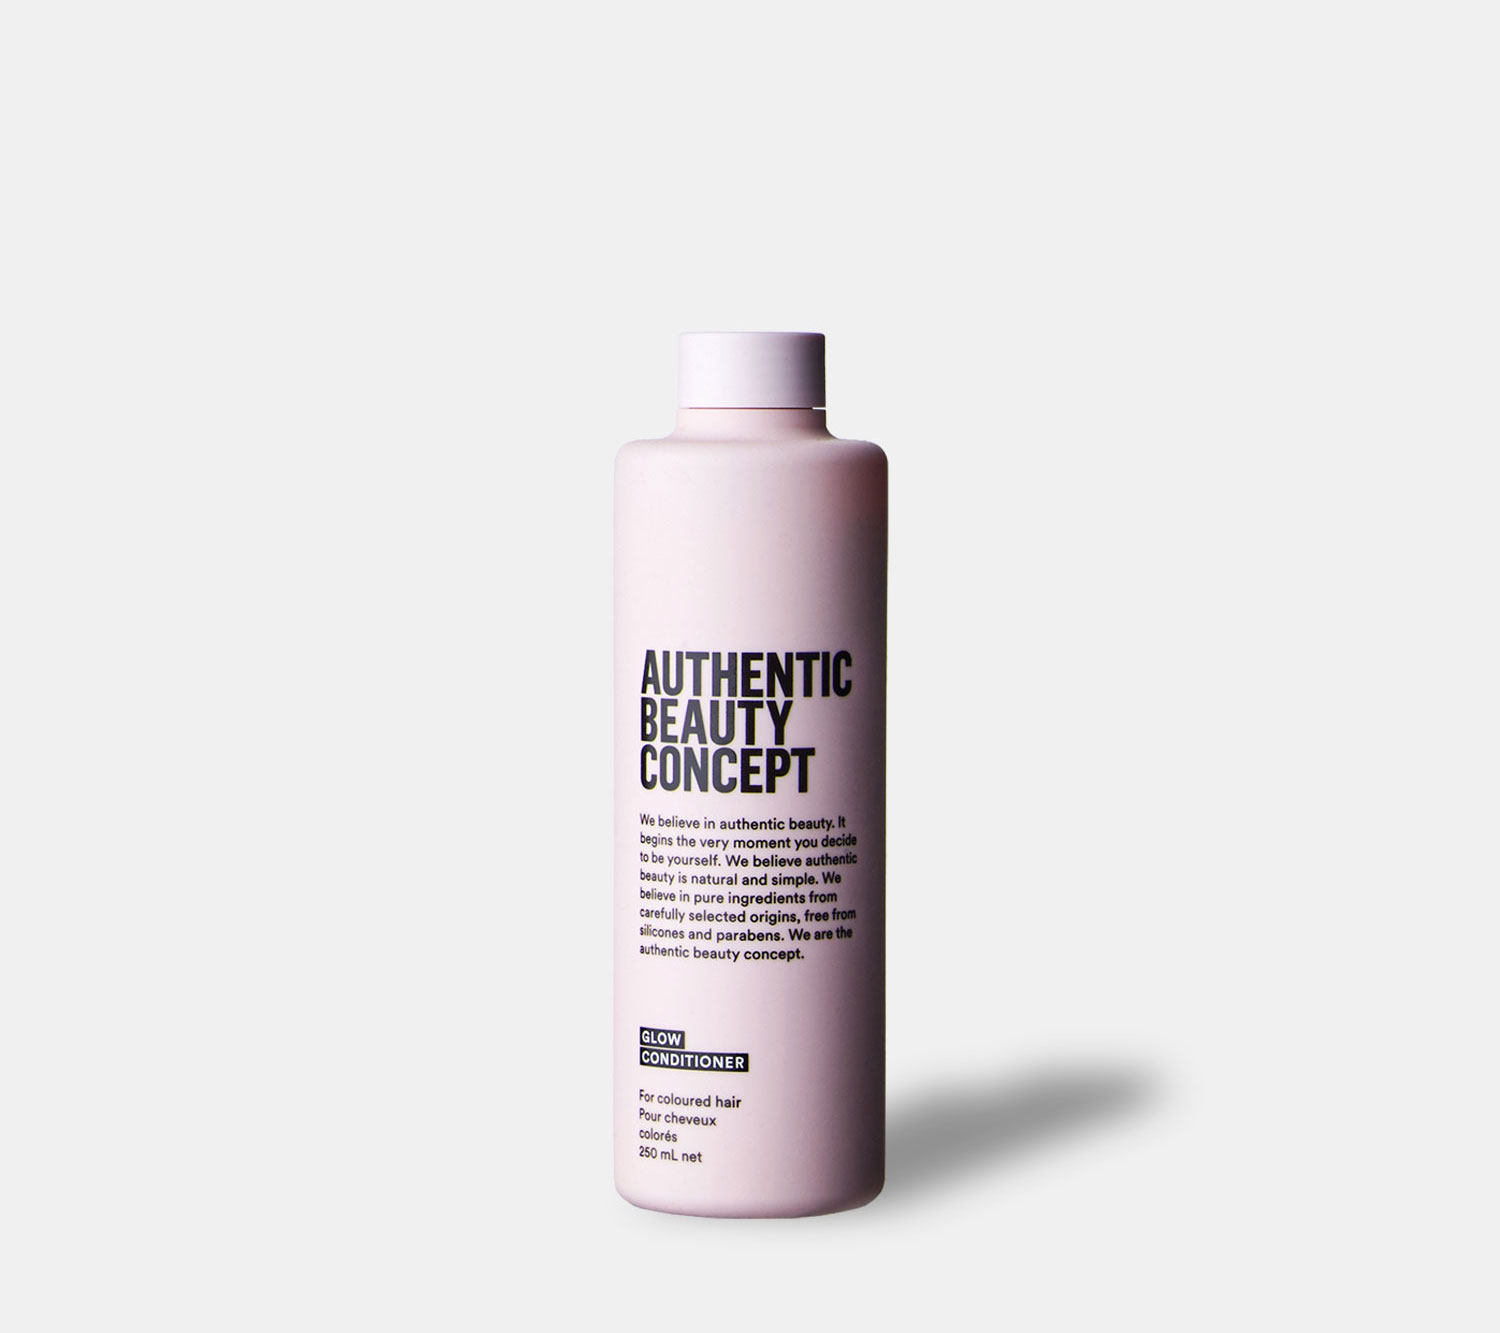 AUTHENTIC BEAUTY CONCEPT GLOW CONDITIONER